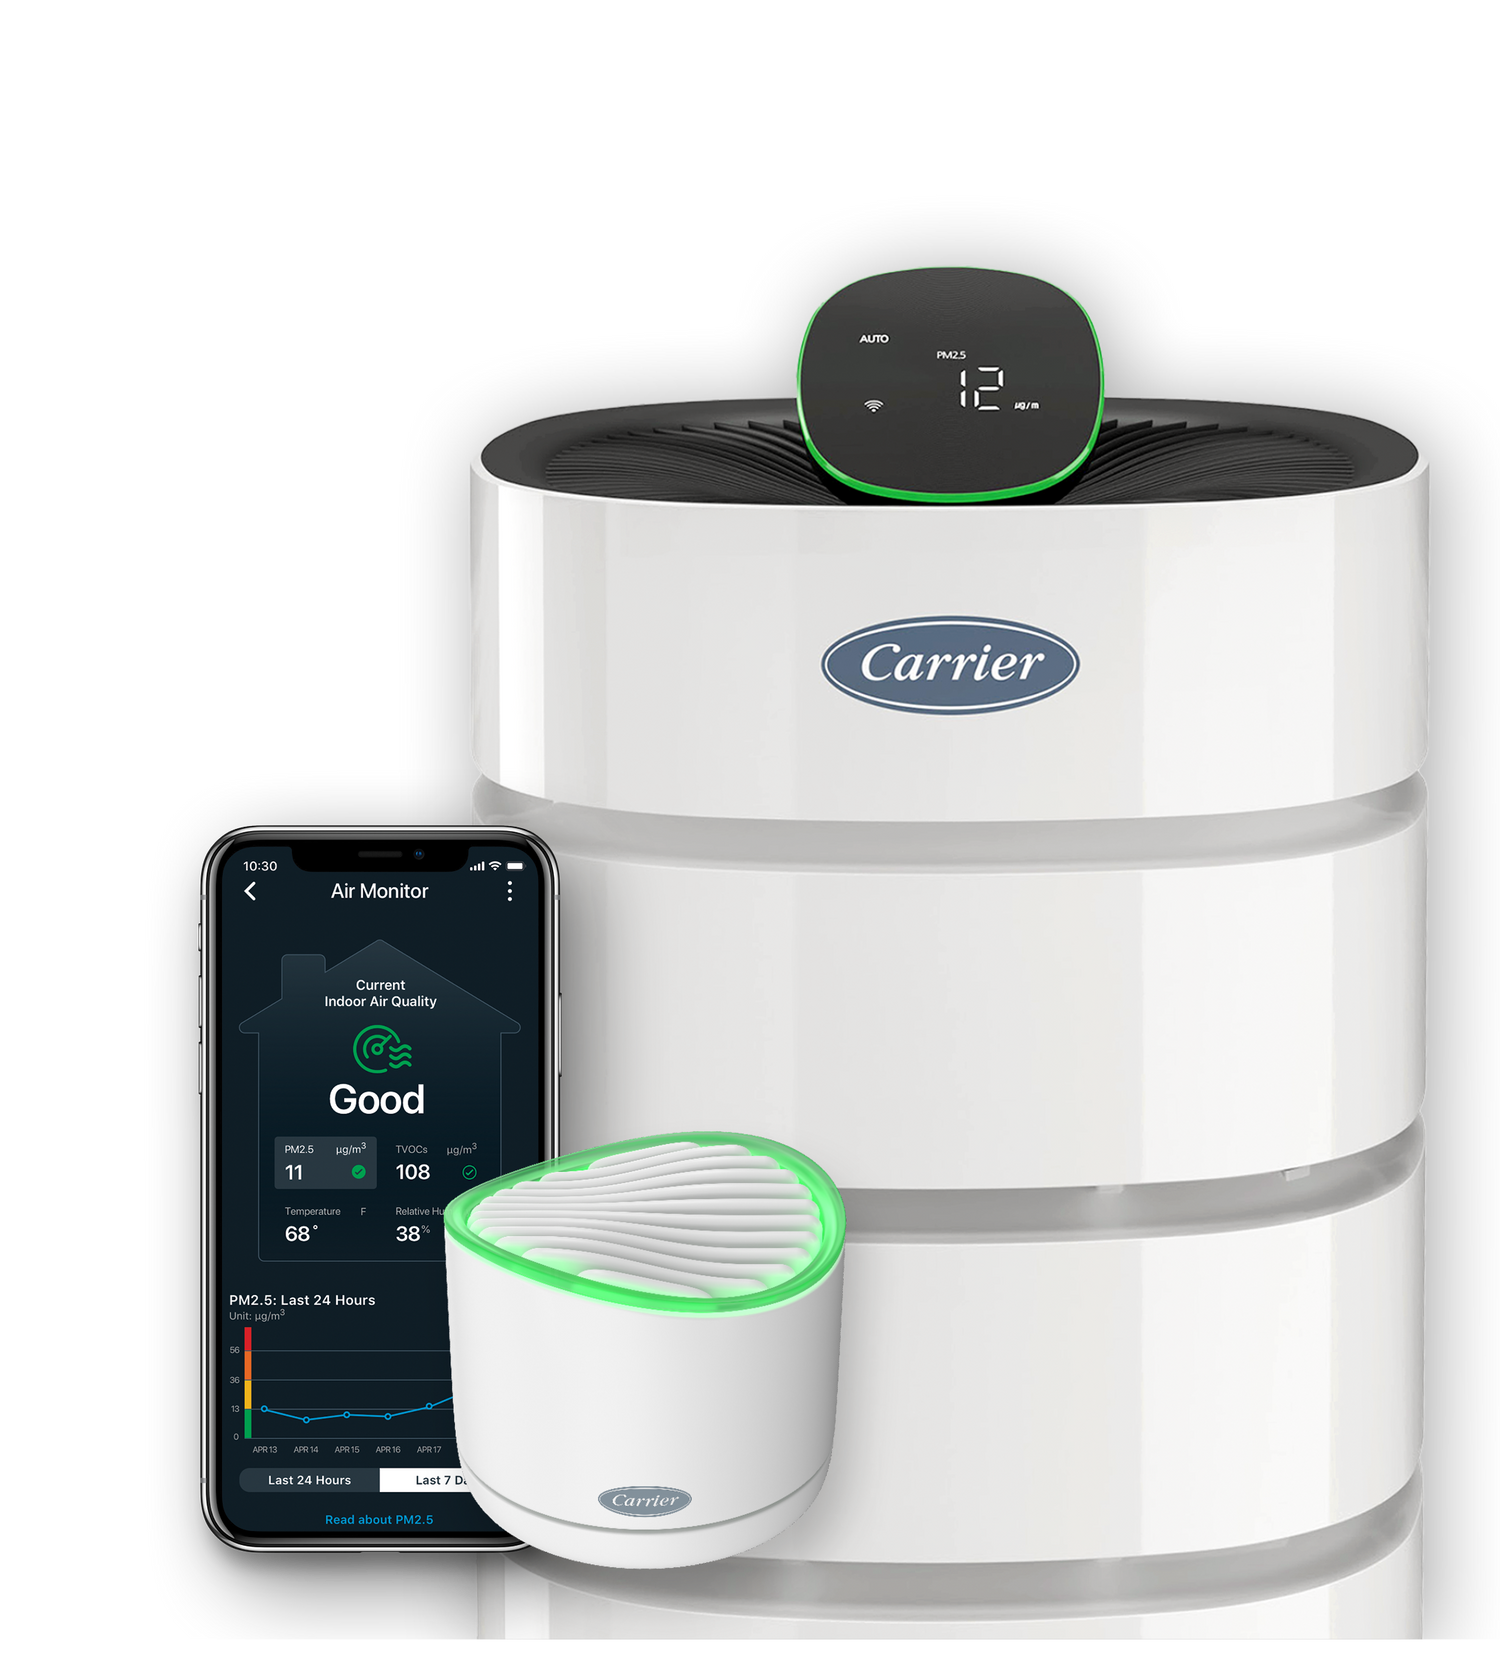 Carrier Smart Air Purifier and Air Monitor with a phone showing the Carrier Home app screen